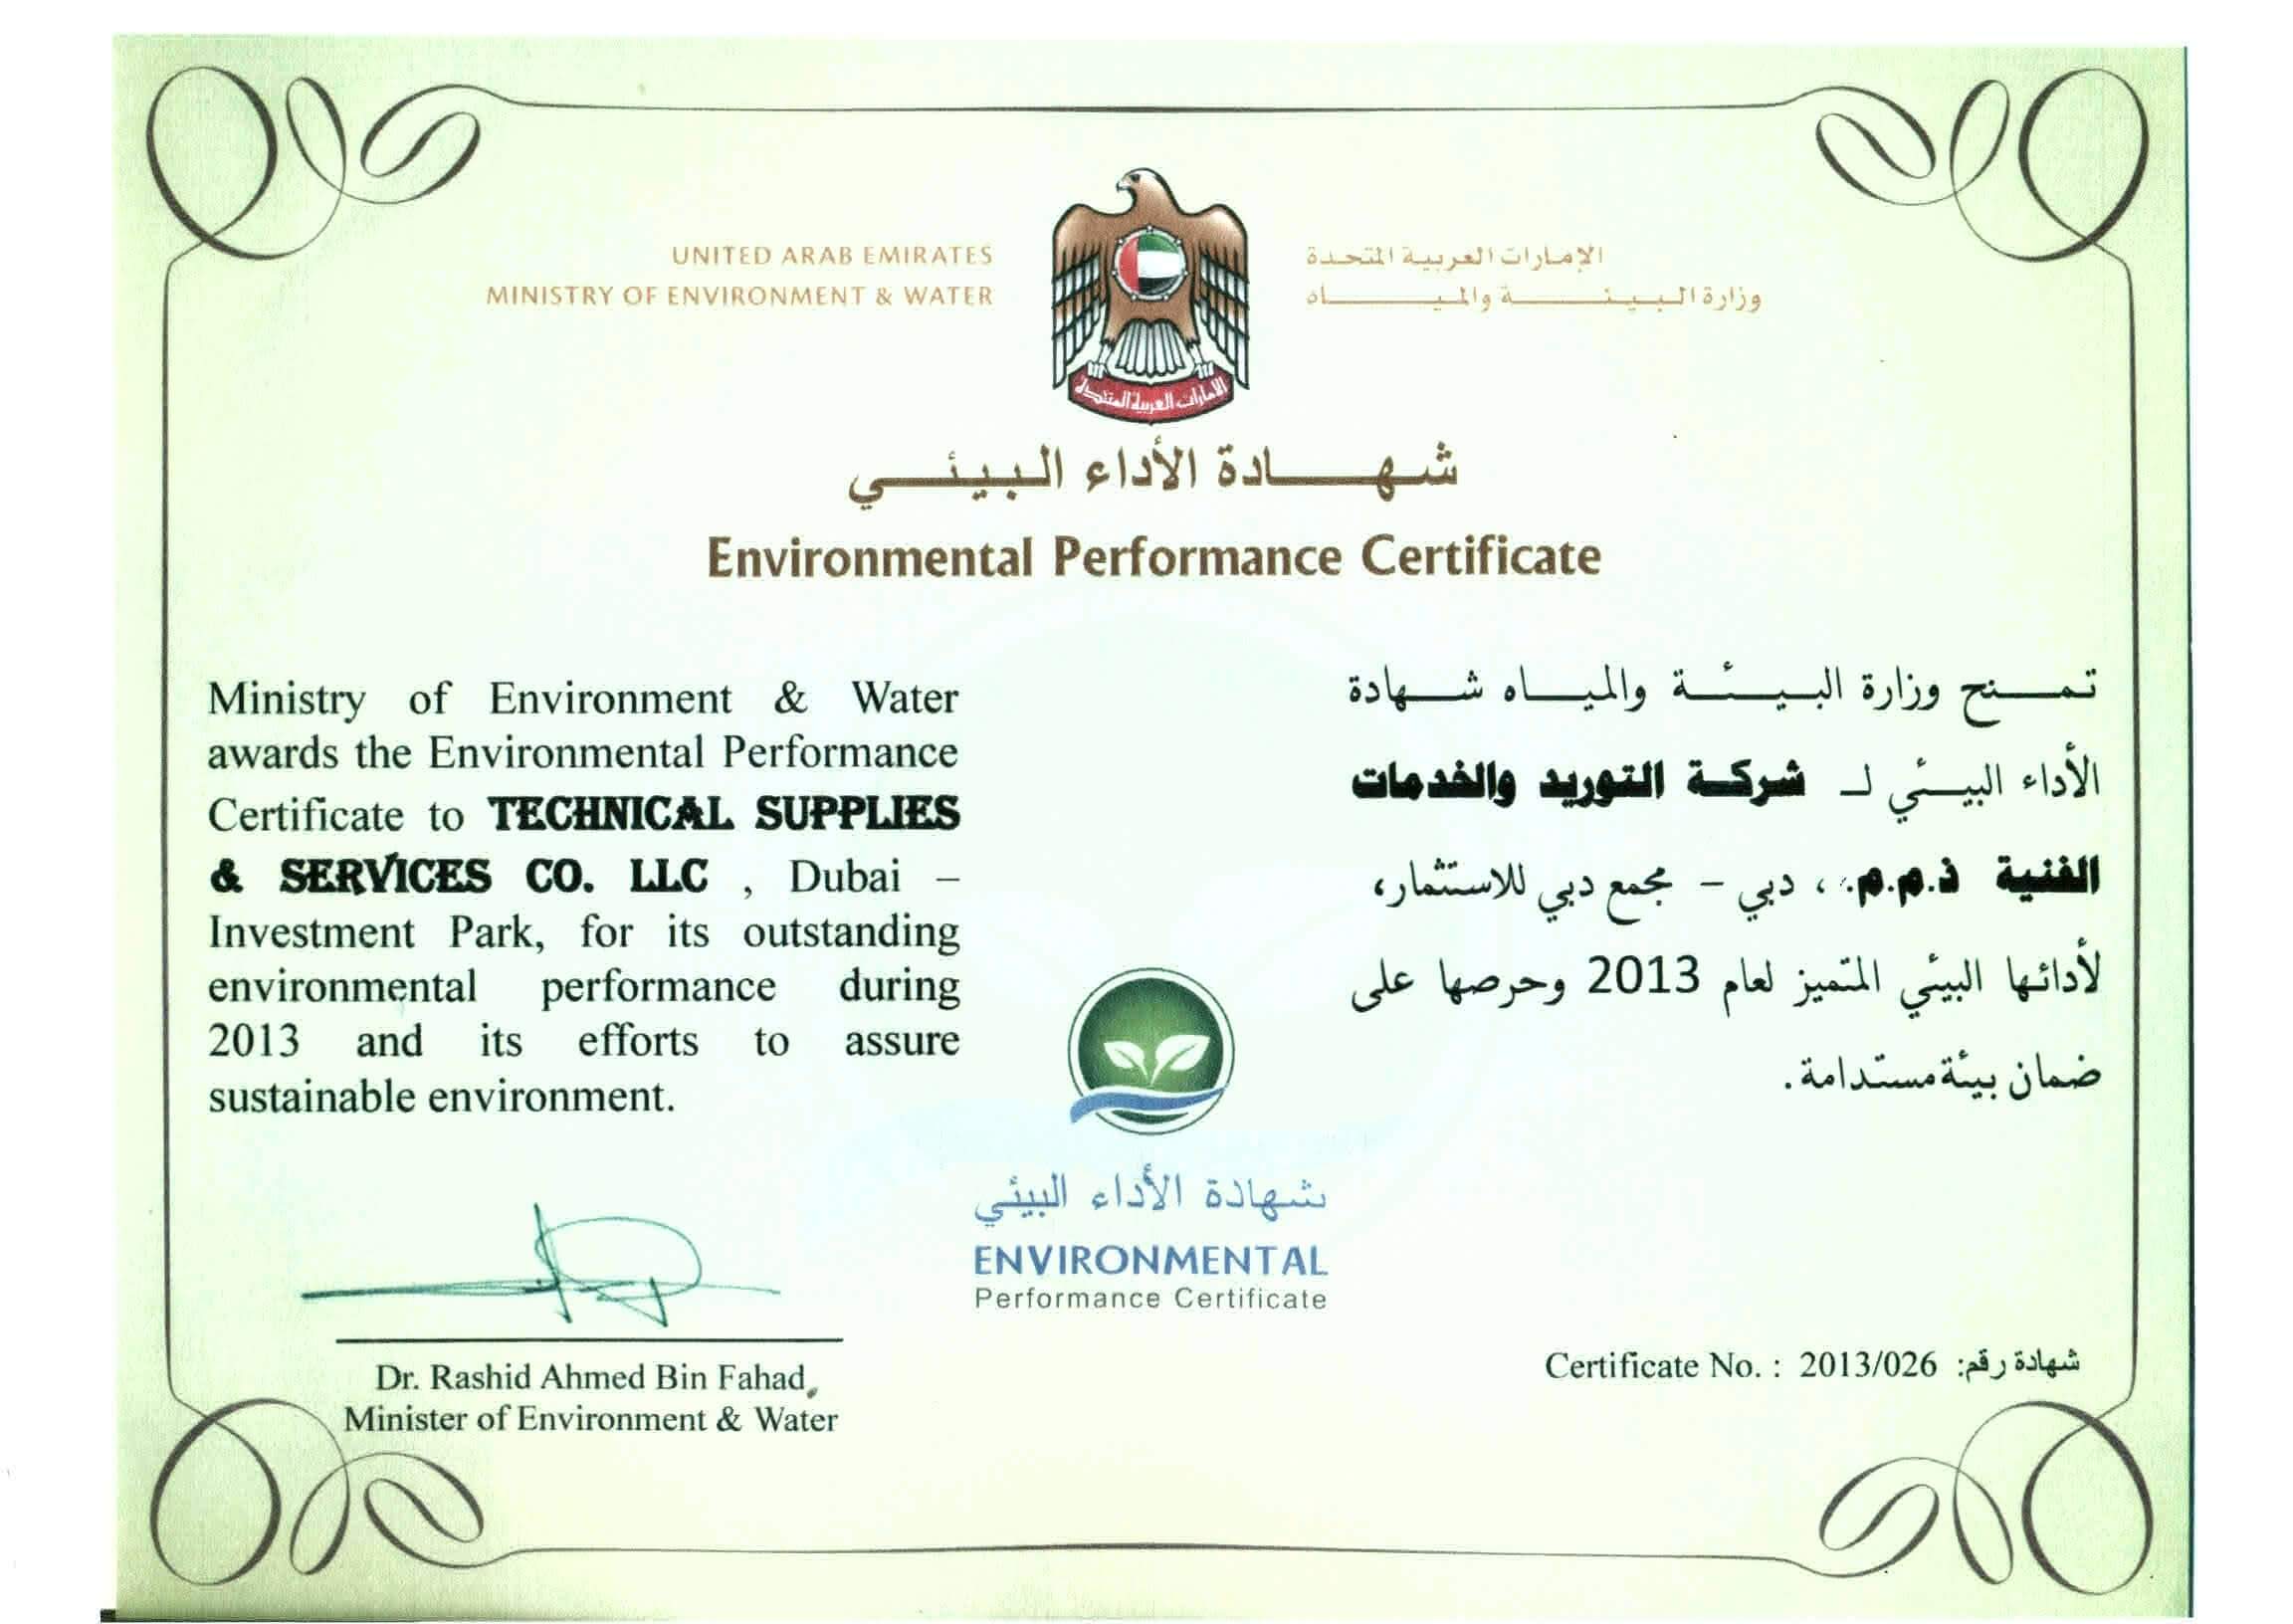 MINISTRY OF CLIMATE CHANGE AND ENVIRONMENT